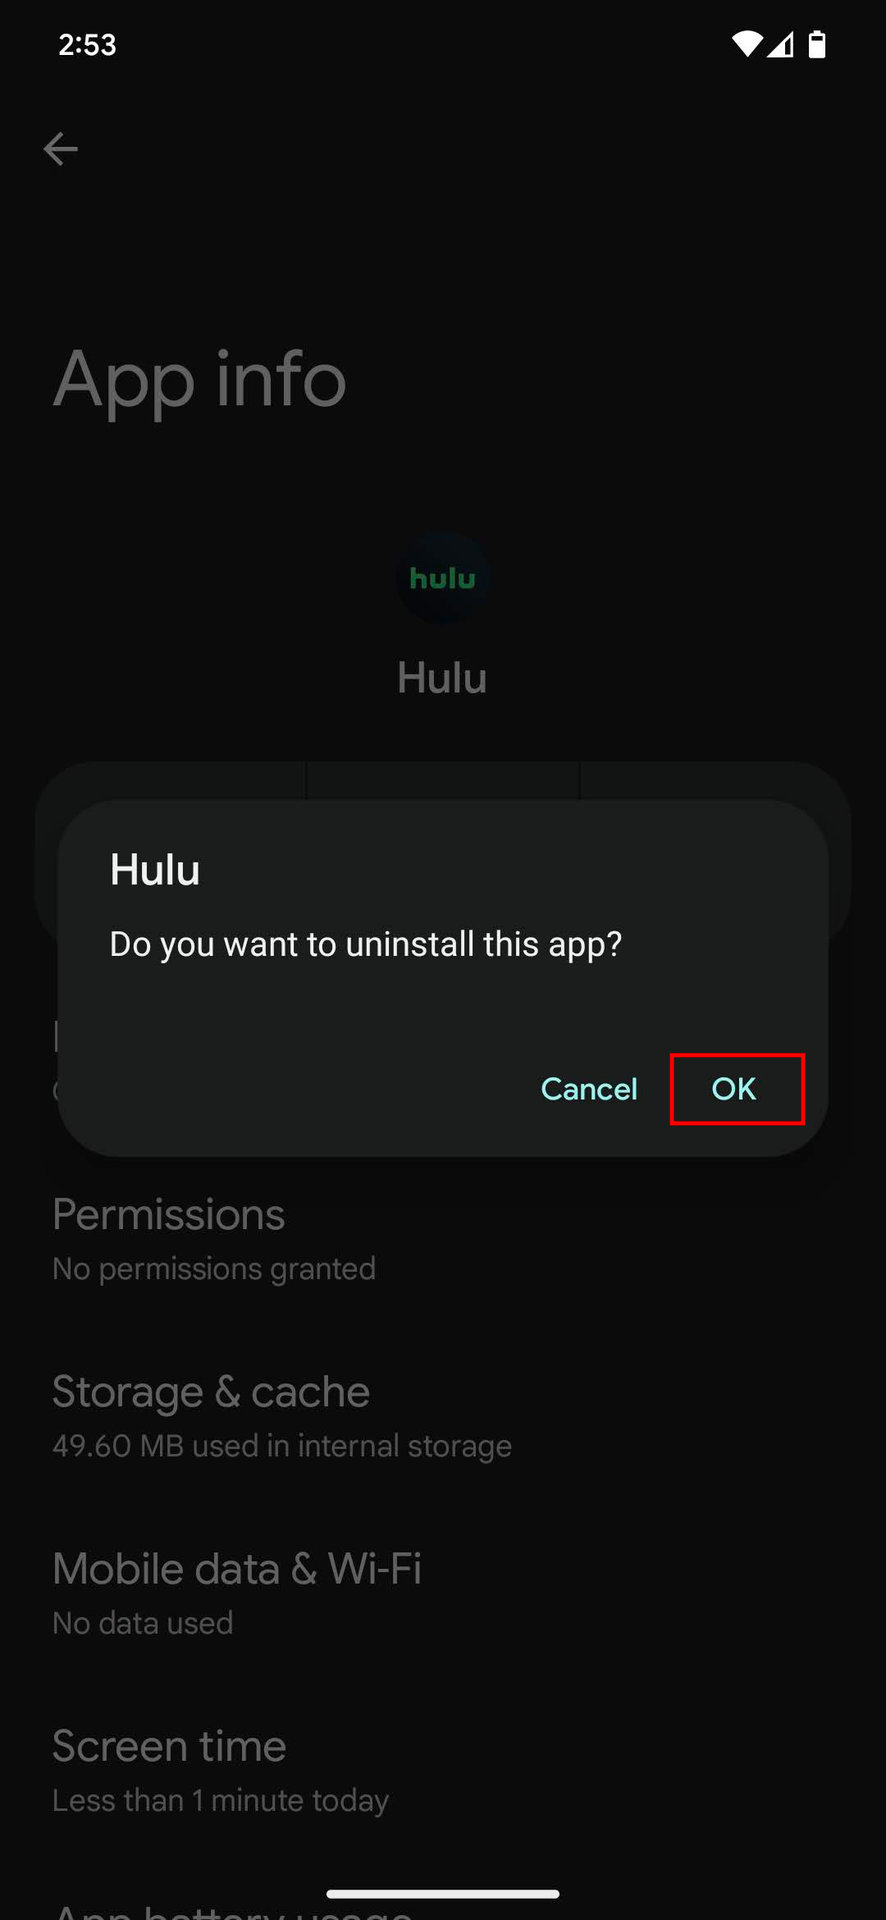 How to uninstall Hulu app in Android 4